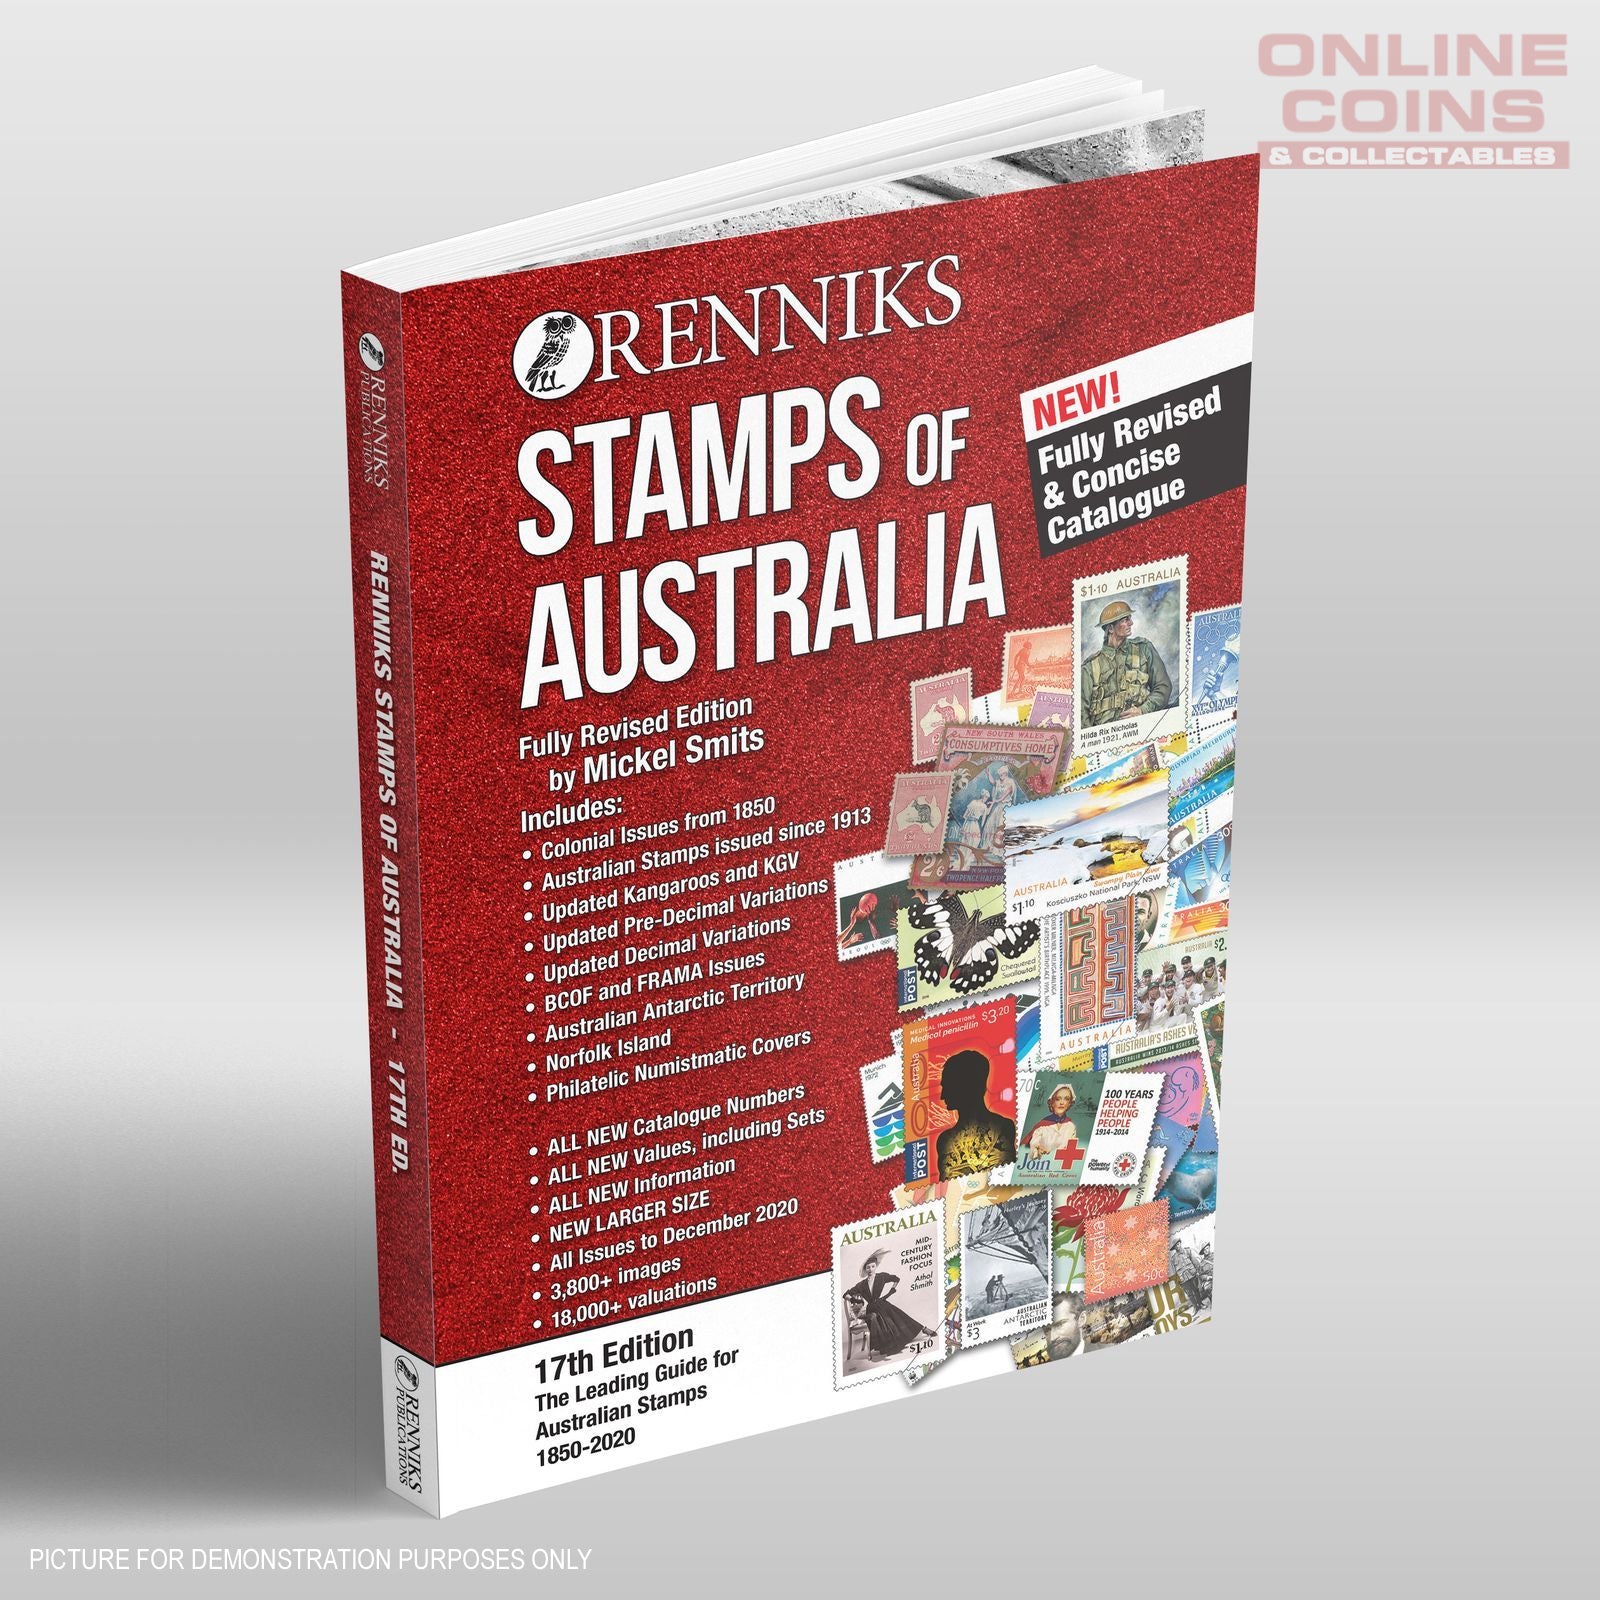 Renniks Stamps of Australia 17th Edition  - NEW EDITION